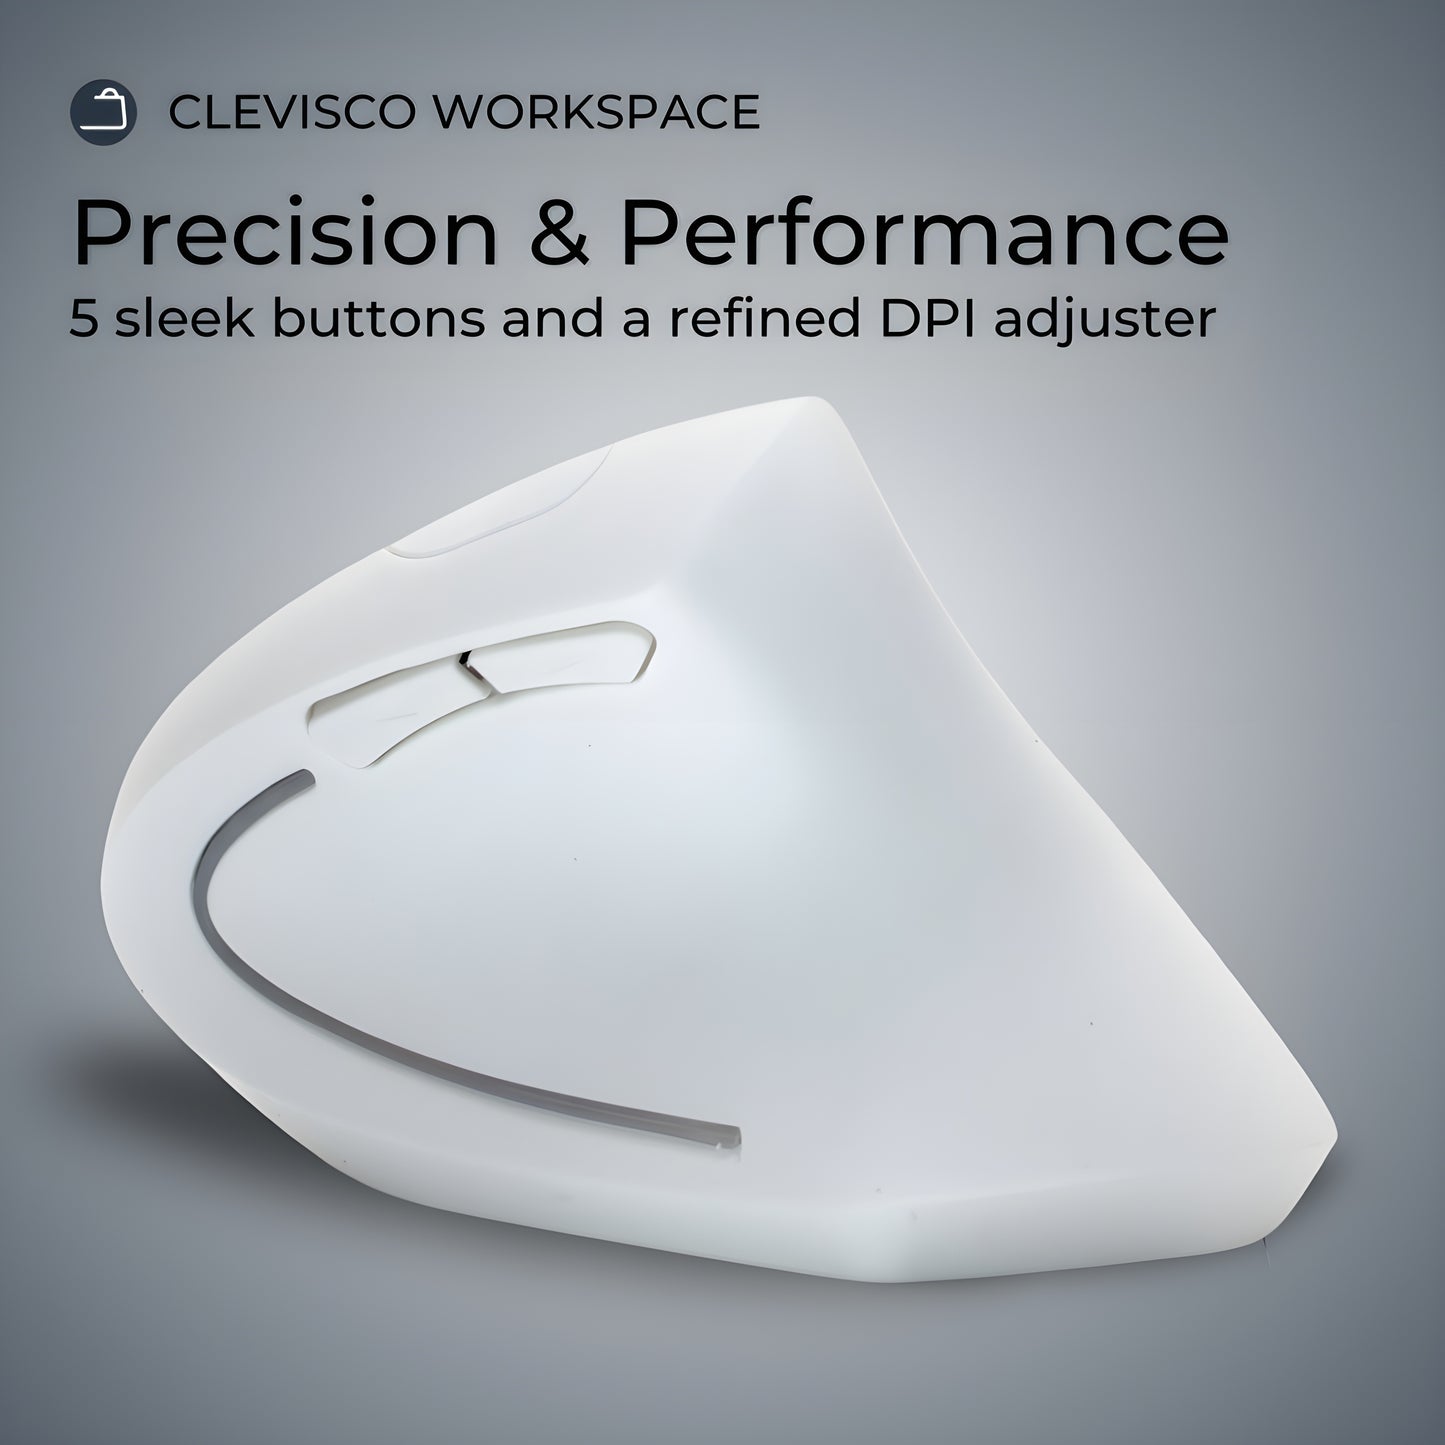 A high-contrast image showcasing Clevisco Workspace's ergonomic mouse in white, highlighting its 'Precision & Performance' with 5 sleek buttons and a refined DPI adjuster, against a minimalistic grey background.